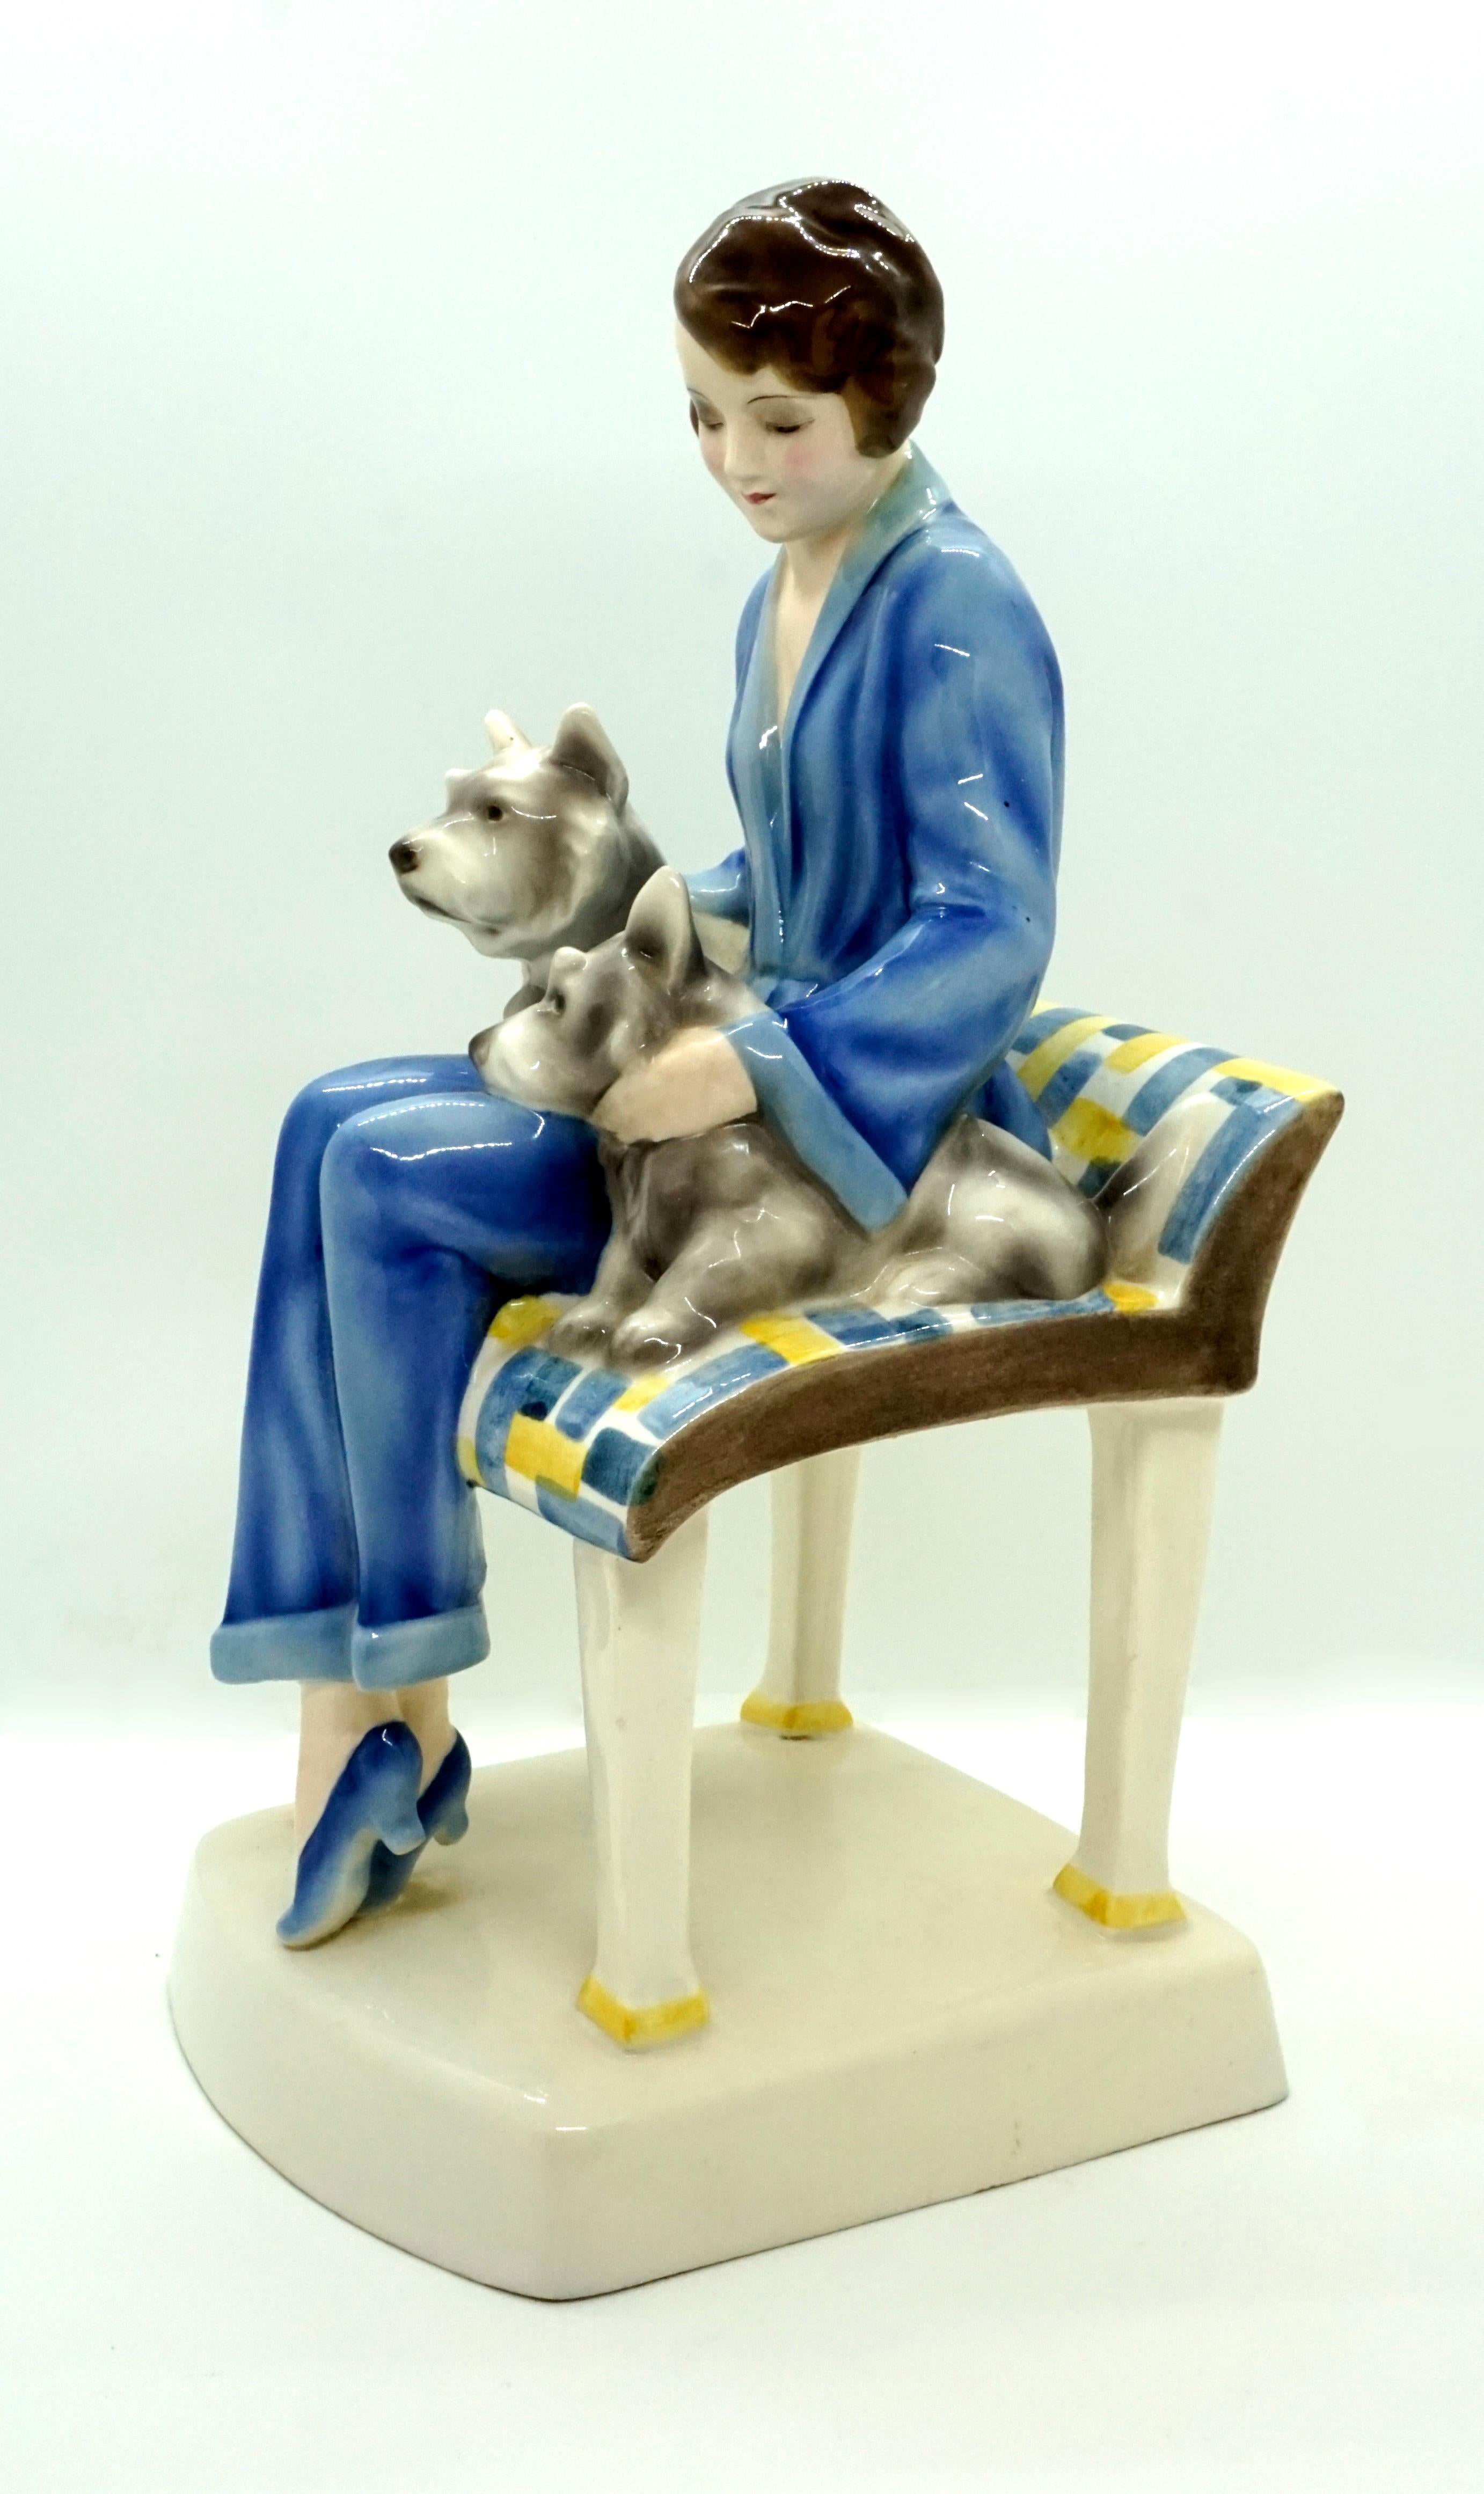 Rarest Goldscheider Figure Group of the 1930s.
The young lady in a blue trouser suit with a short brunette hairstyle sits on a large stool with a low backrest. With both hands, she hugs two dogs that nestle against her legs on the left and right.